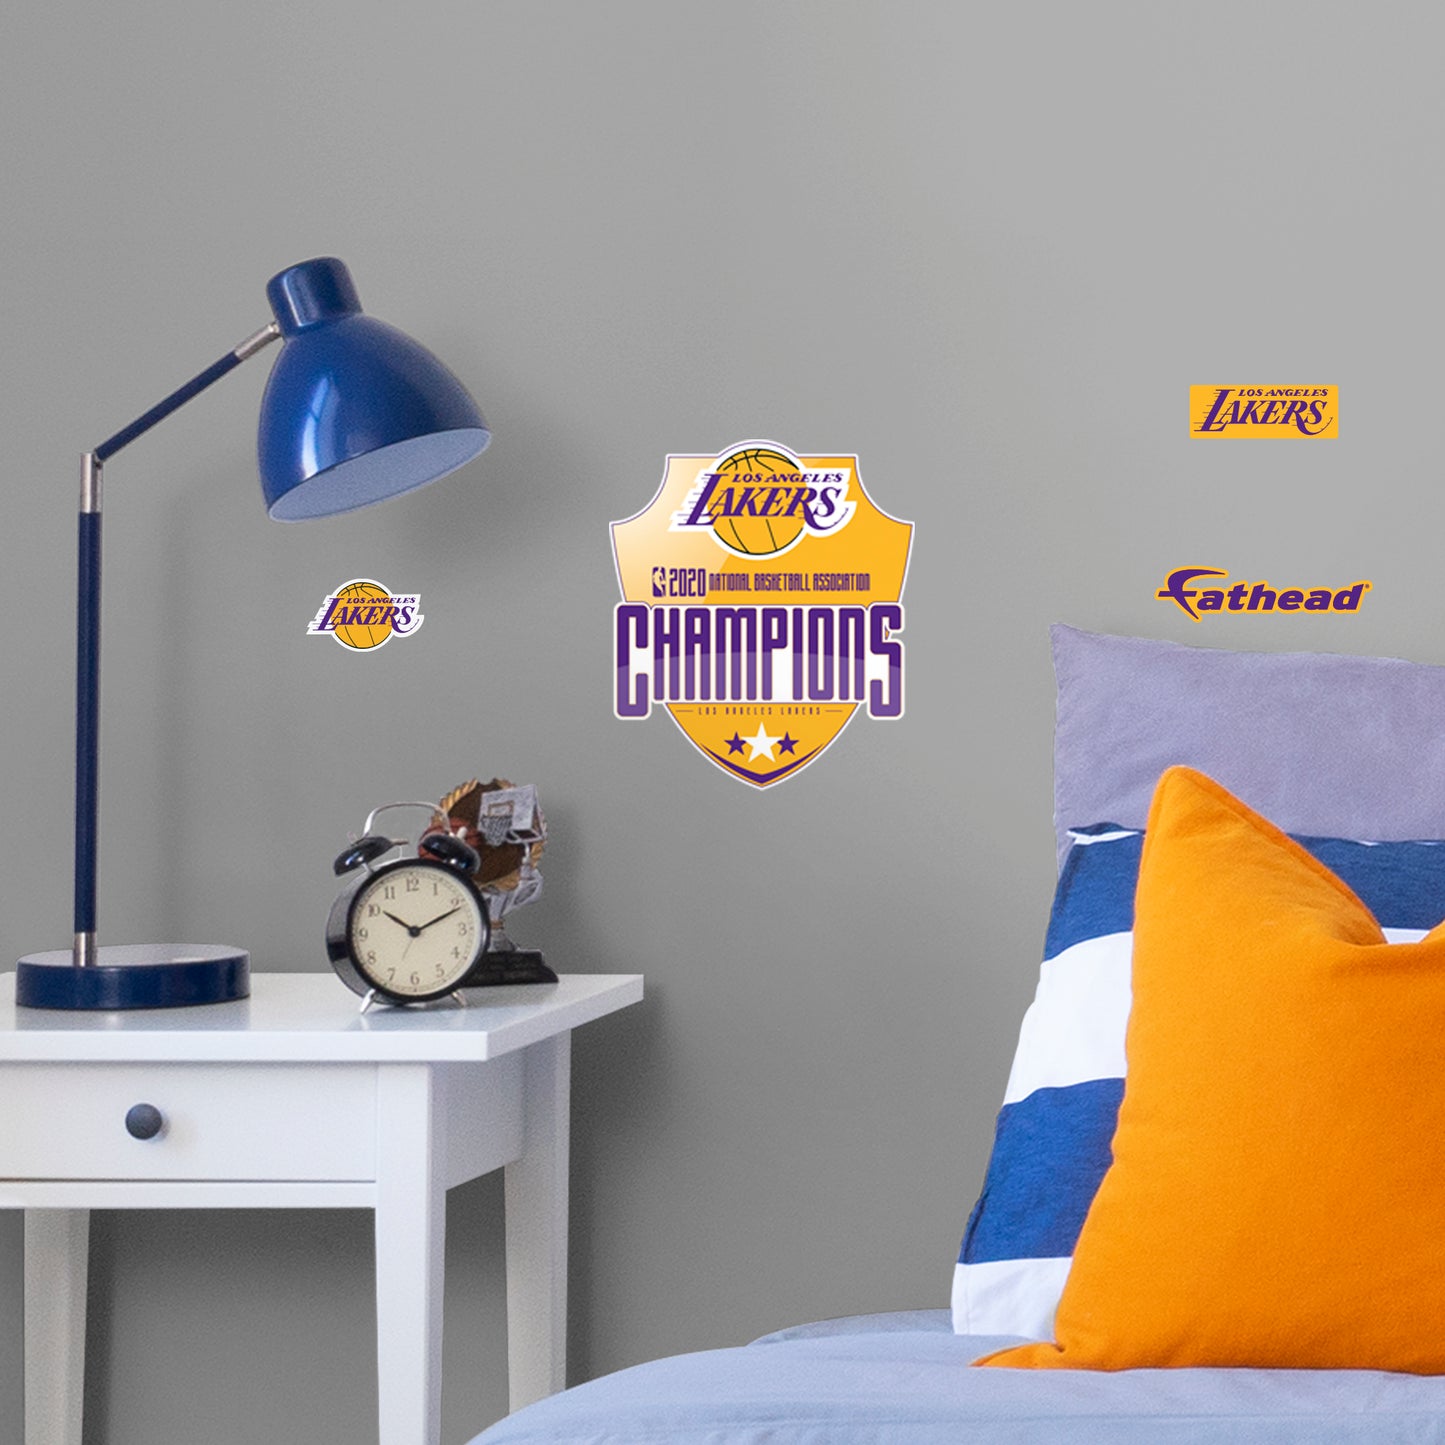 Los Angeles Lakers: 2020 Champions Logo - Officially Licensed NBA Removable Wall Decal